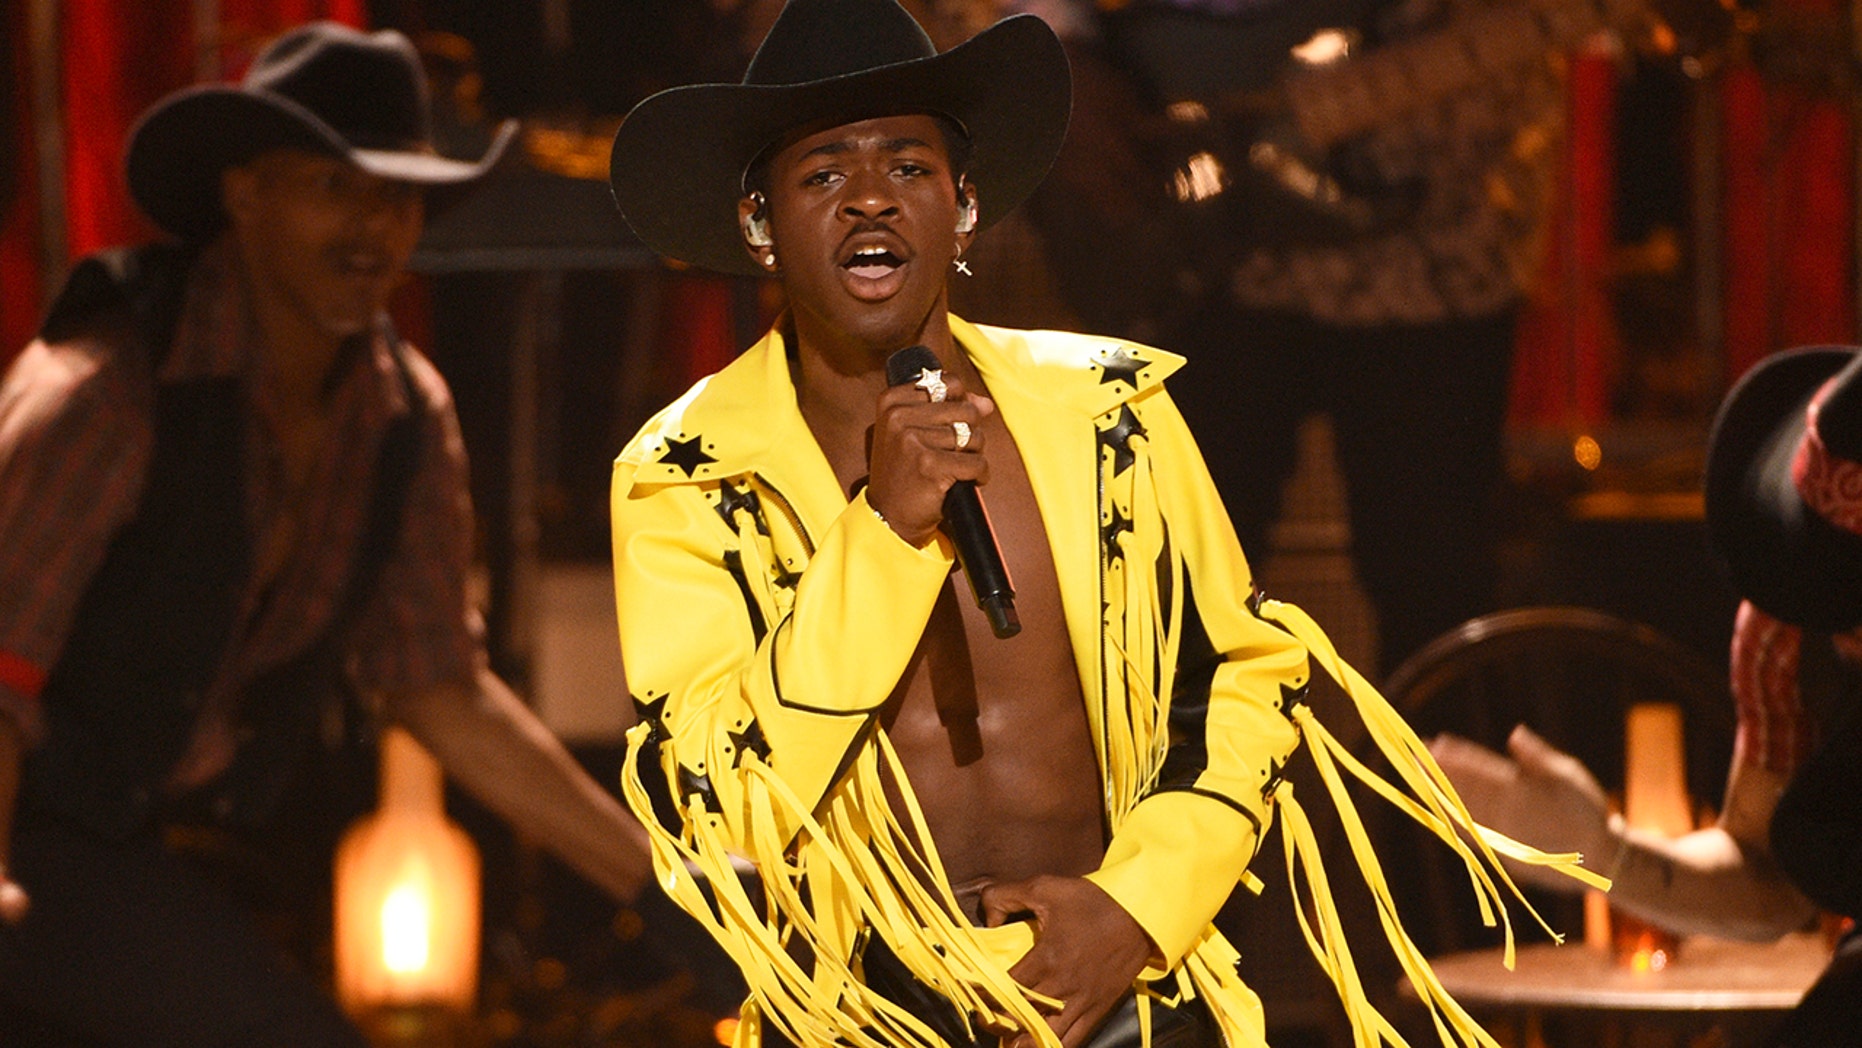 download mp3 free lil nas x old town road igot horses in the back